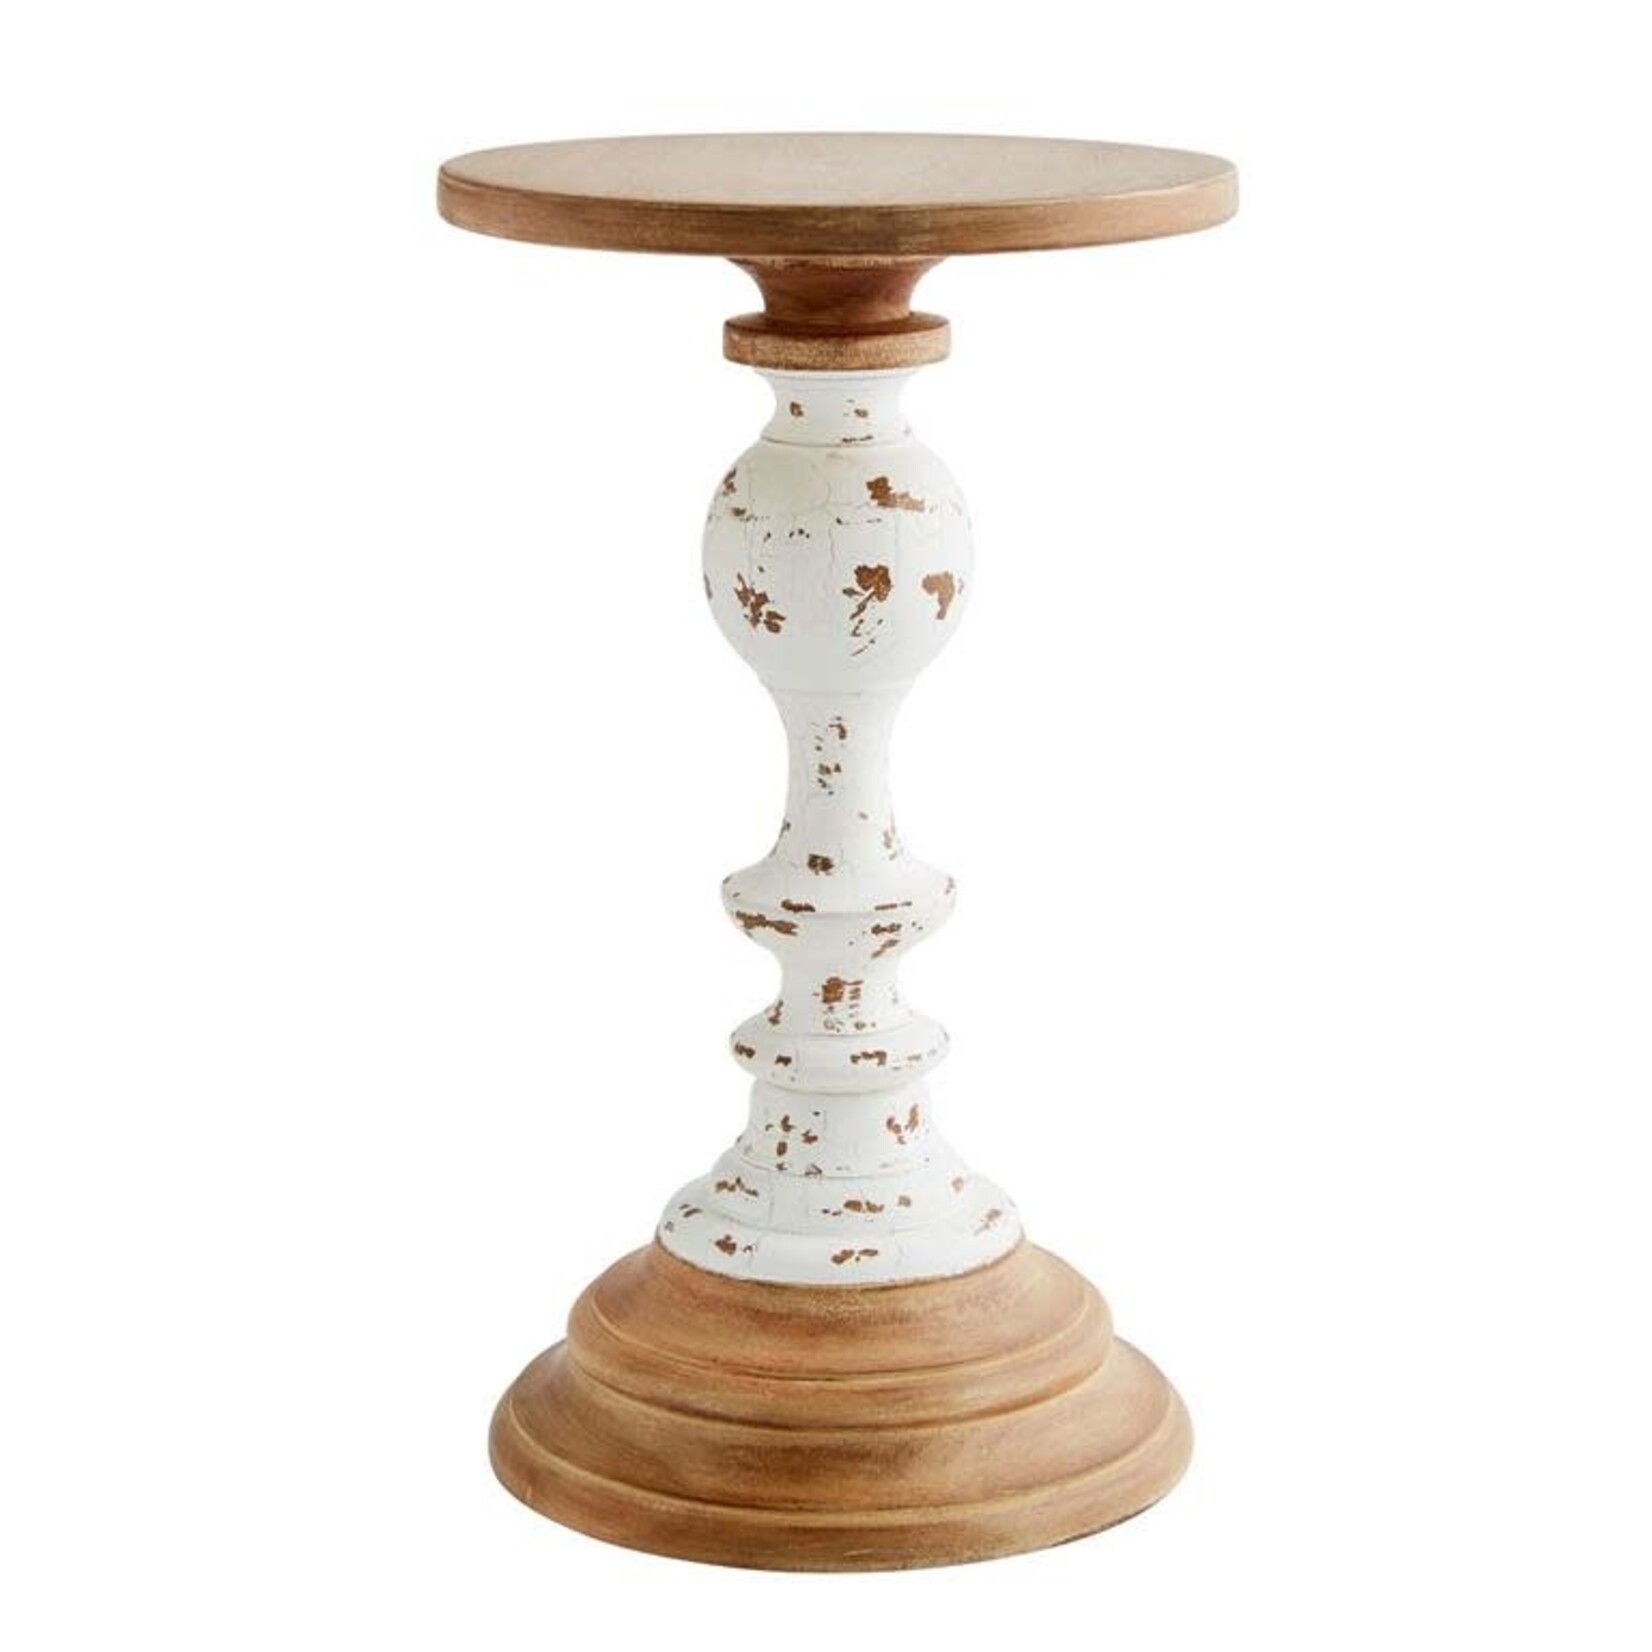 Mud Pie Wooden Rustic Candlestick- Large